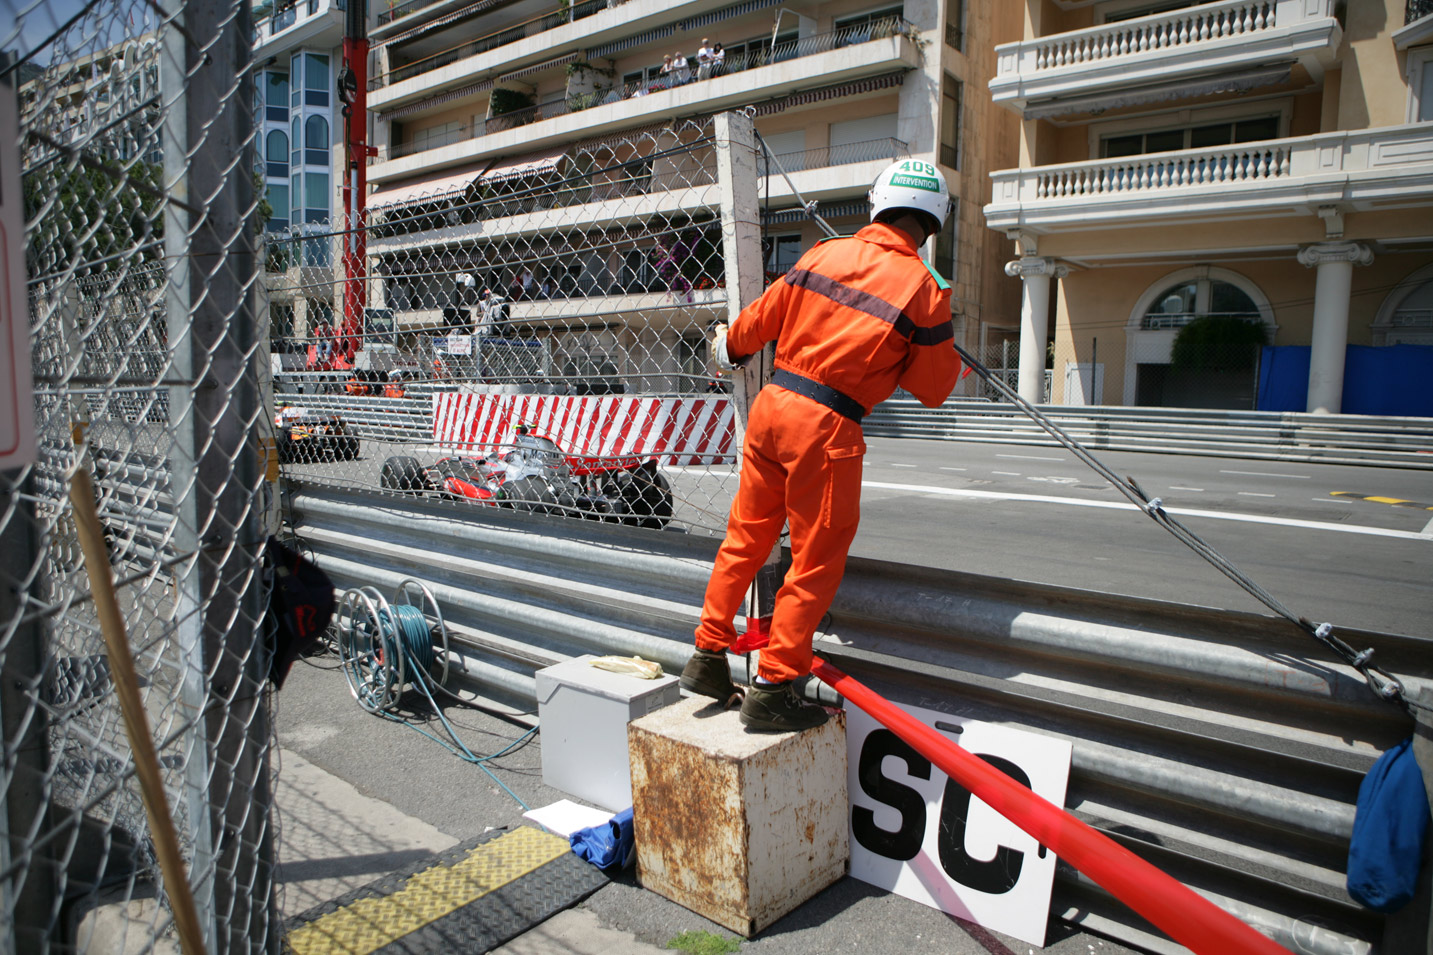 A marshall gets a good look at the cars during the Monaco Grand Prix